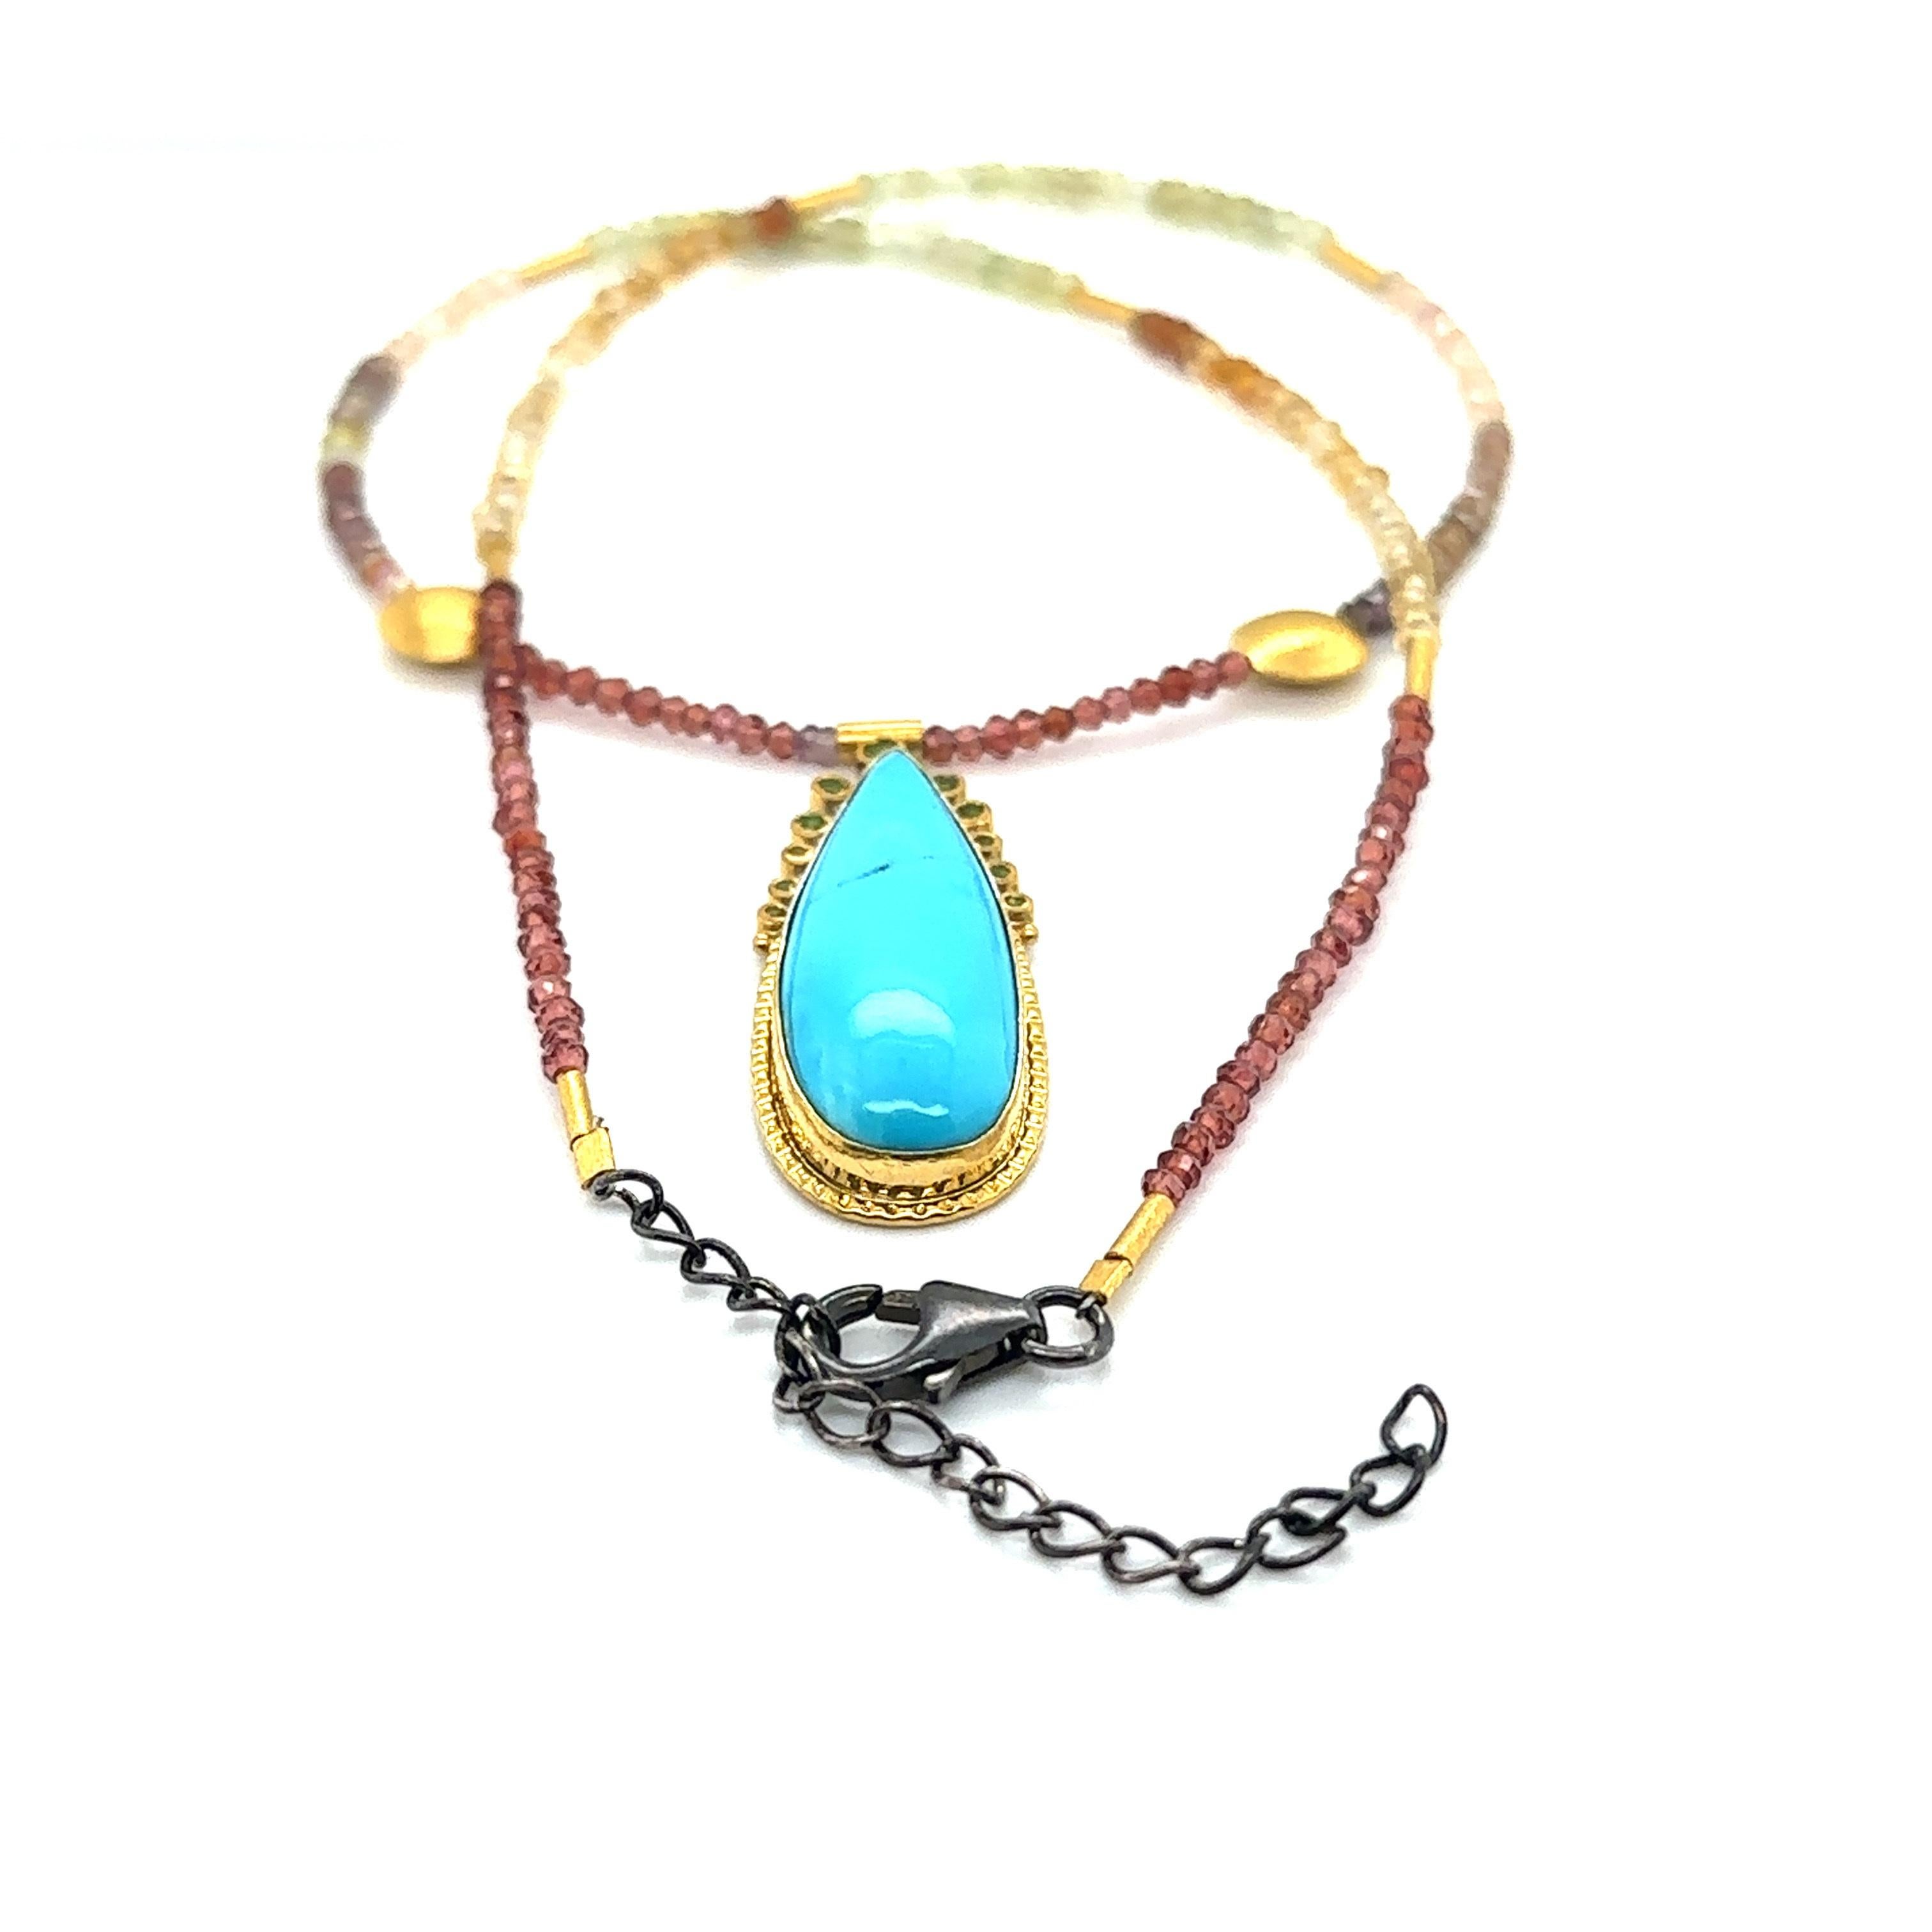 JAS-19-1845 - 24K GOLD/STERLING SILVER w KINGMAN TURQUOISE & MULTI COLOR BEADS For Sale 3